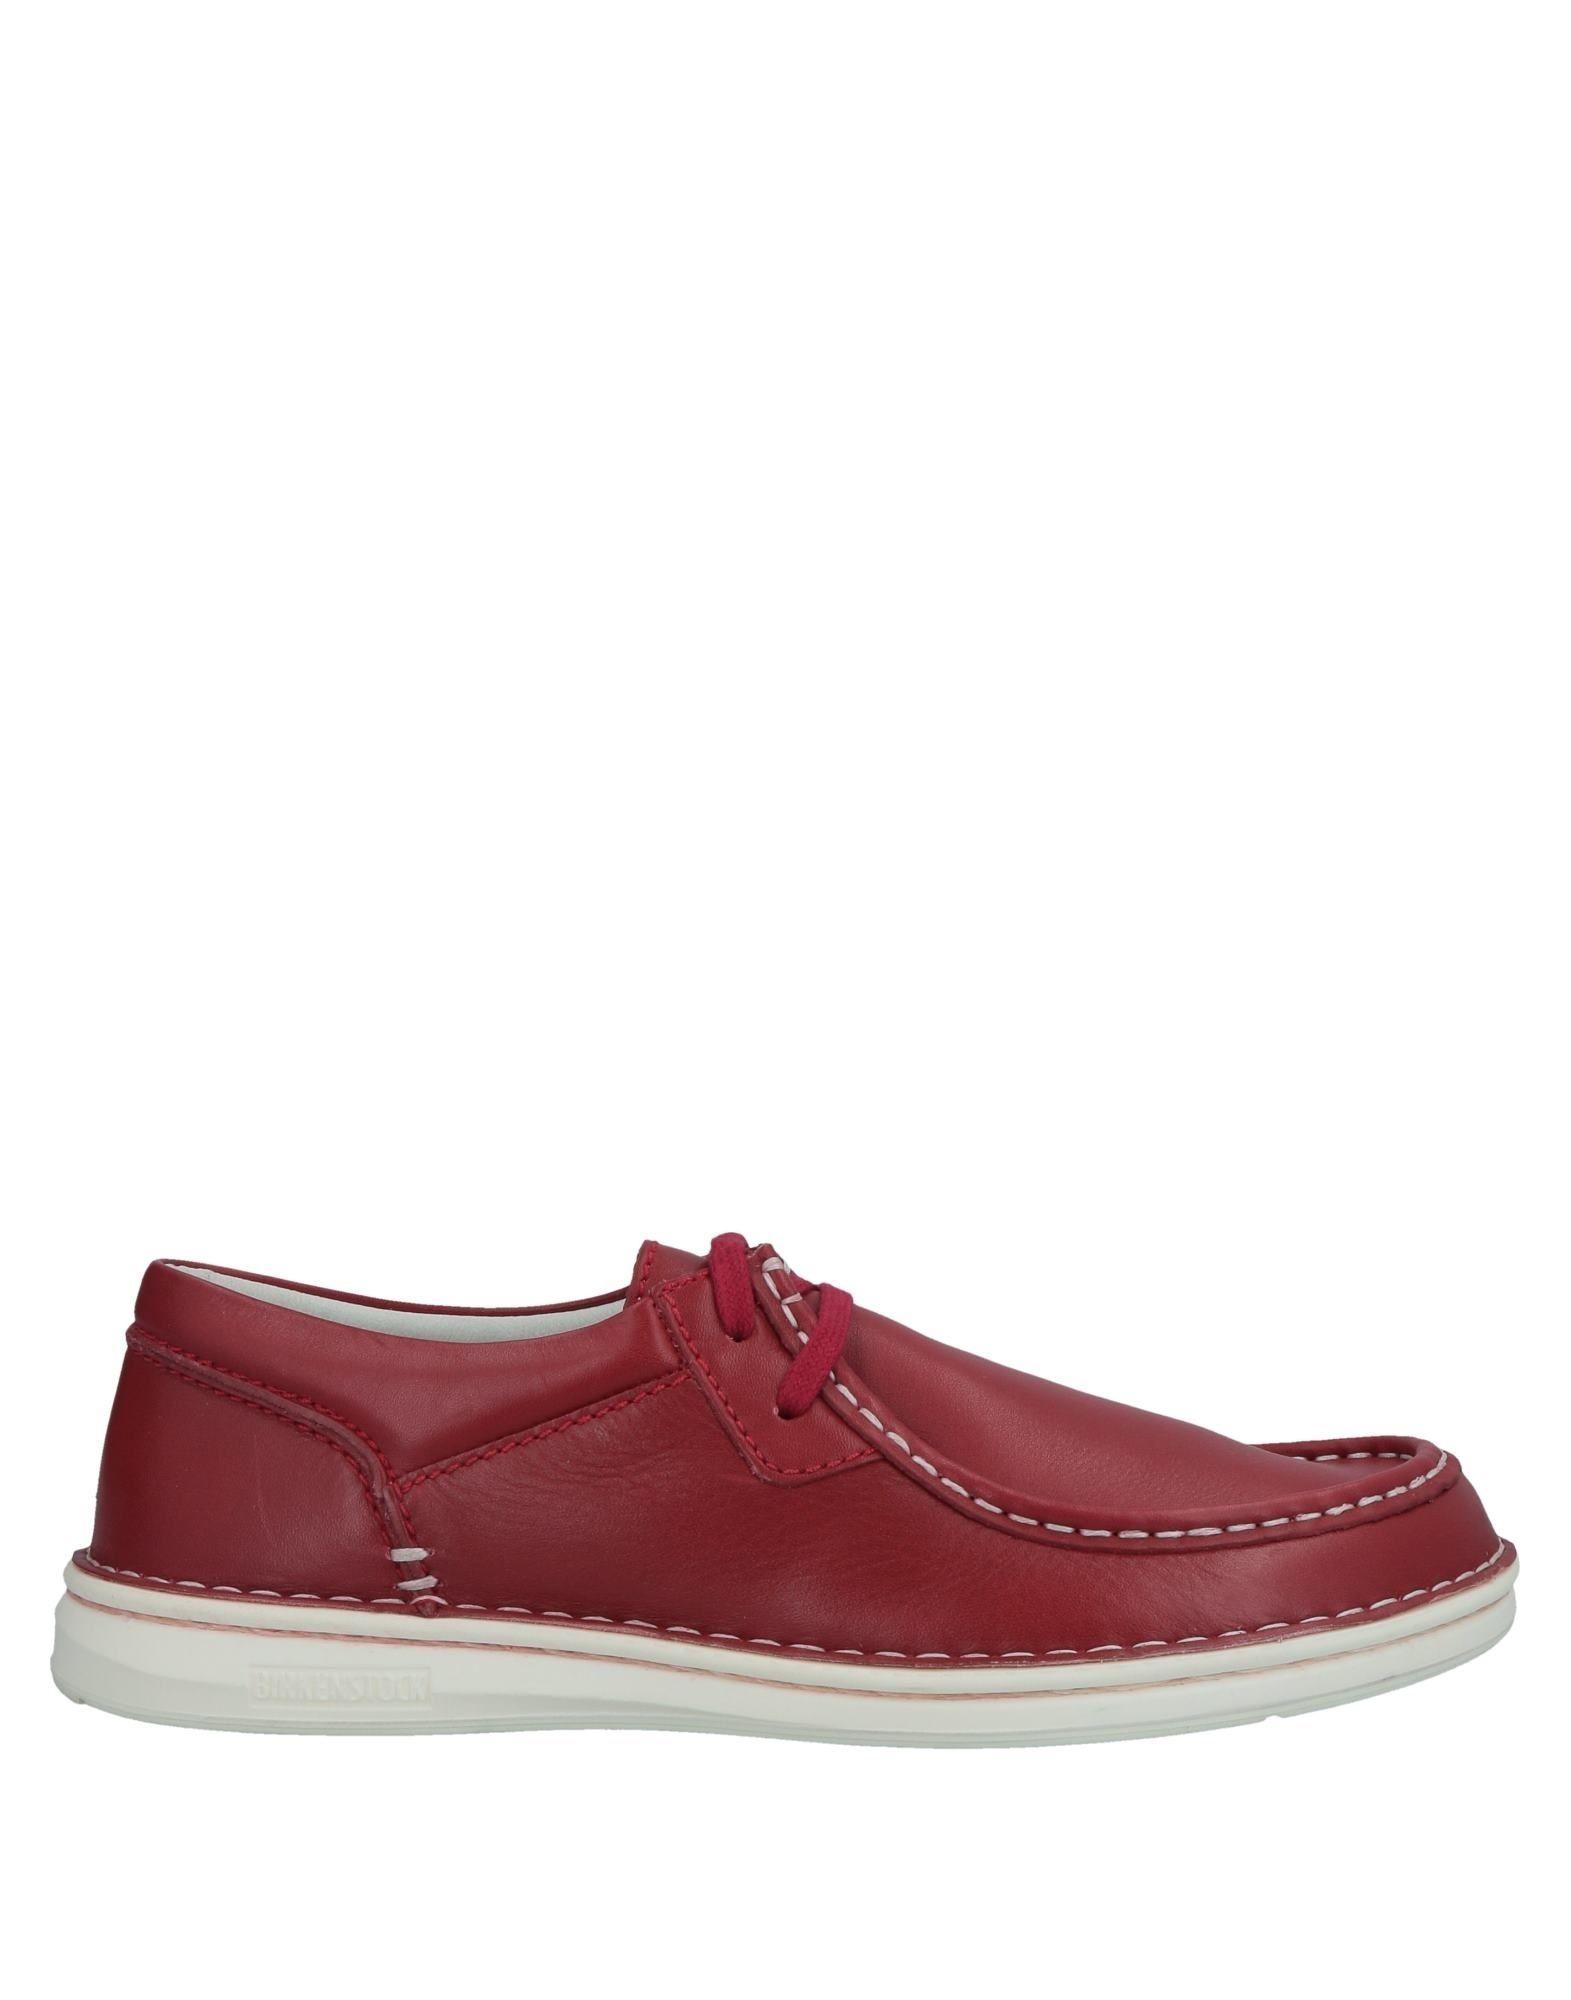 Birkenstock Lace-up Shoe in Red for Men - Lyst